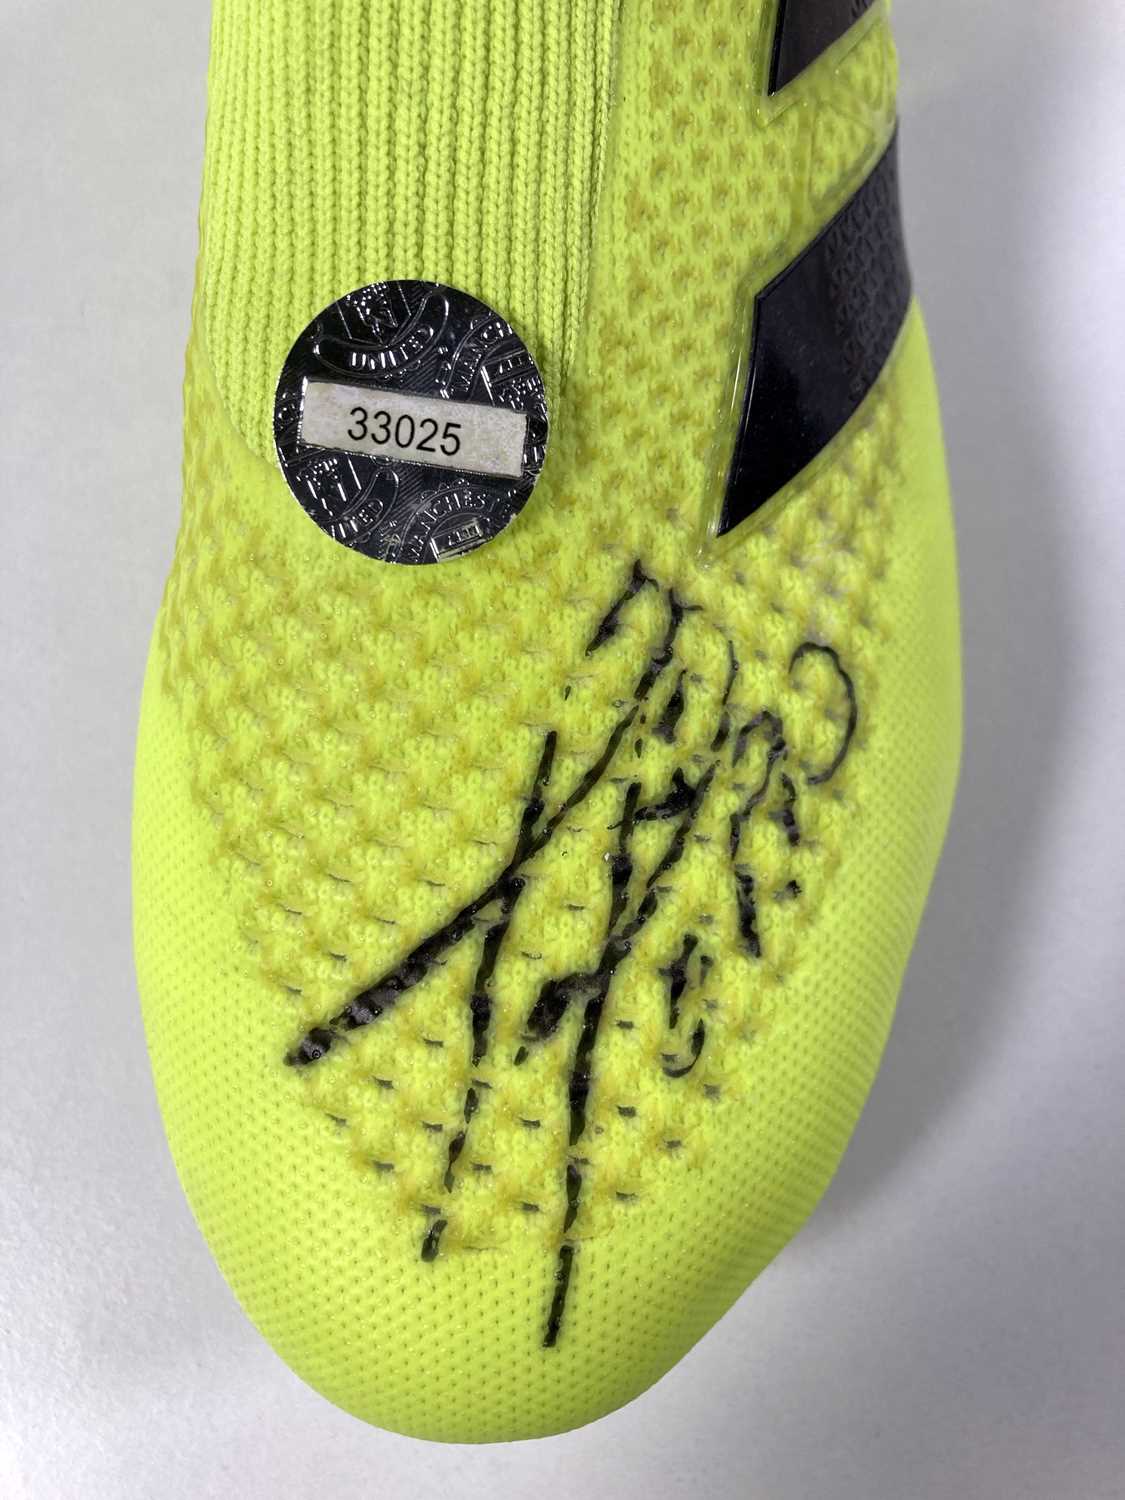 FOOTBALL MEMORABILIA - MANCHESTER UNITED / JUVENTUS INTEREST - PAUL POGBA WORN AND SIGNED BOOT. - Image 8 of 9